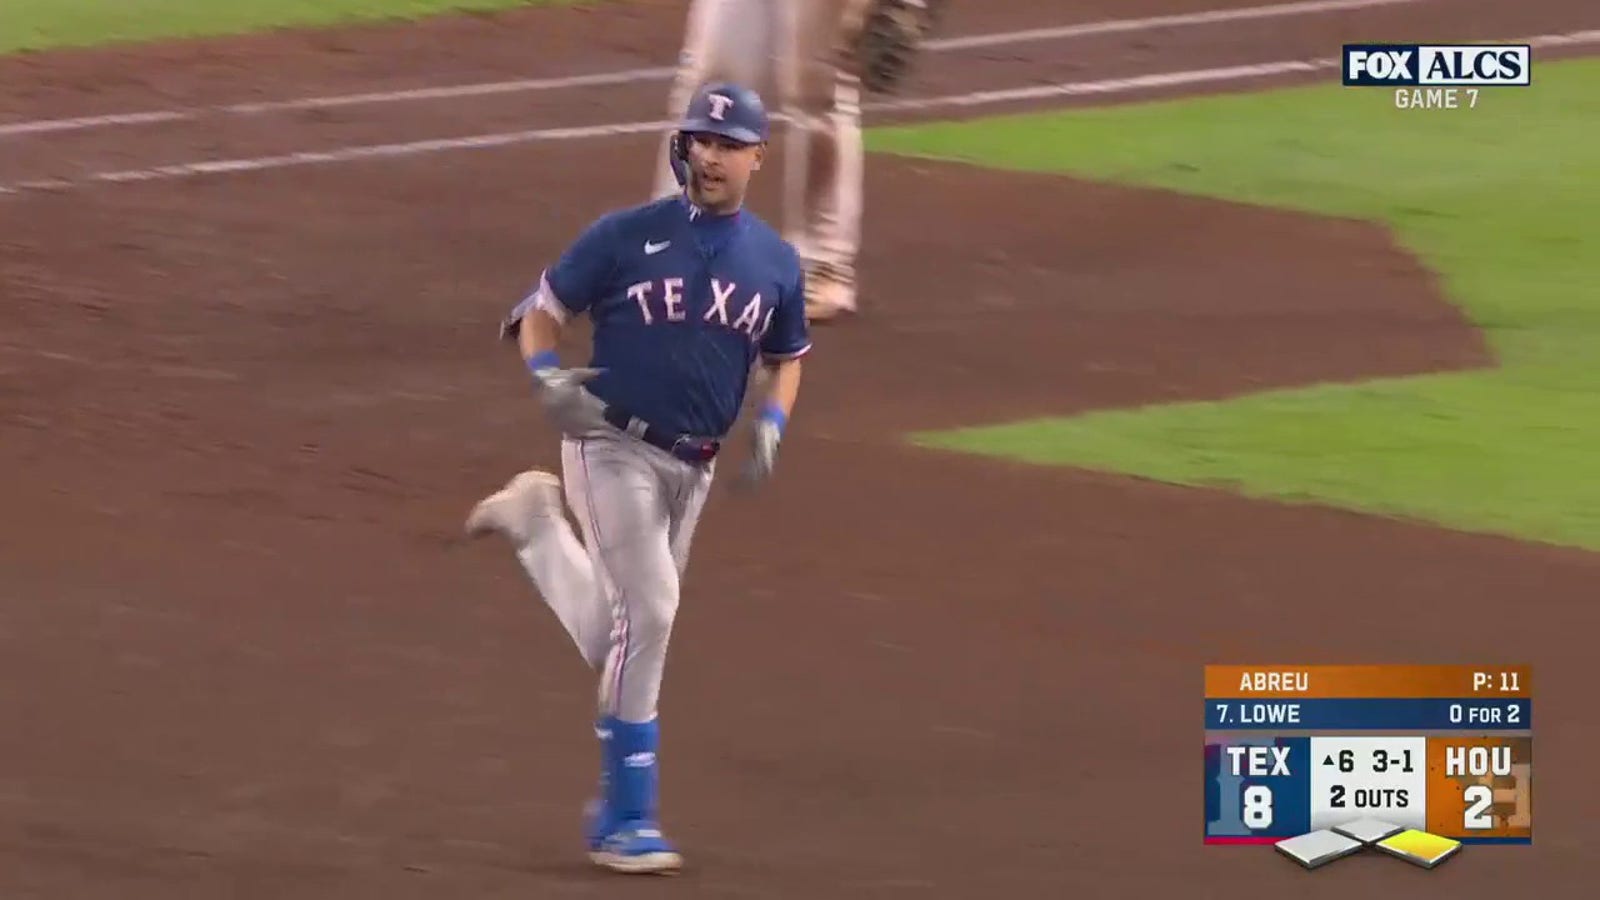 Nathaniel Lowe crushed a two-run homer to extend the Rangers' lead against the Astros.